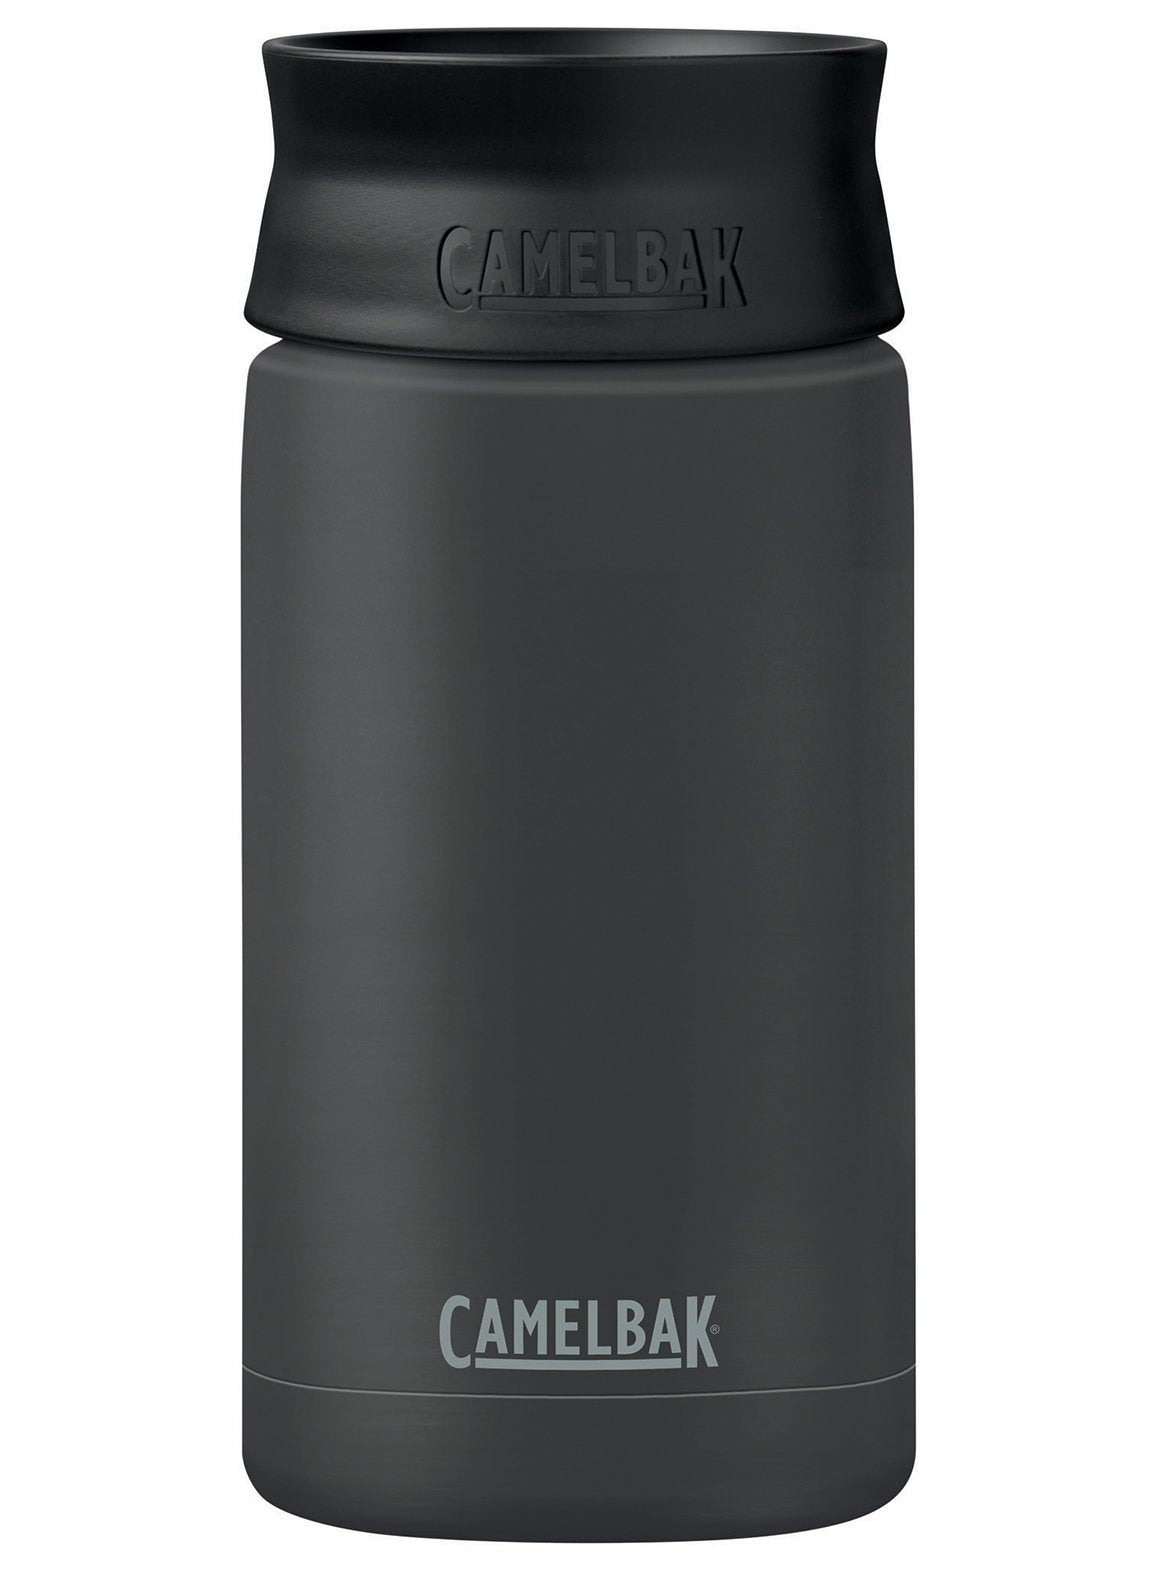 CamelBak Straw Lid Tumbler Replacement Lid - Black/Clear